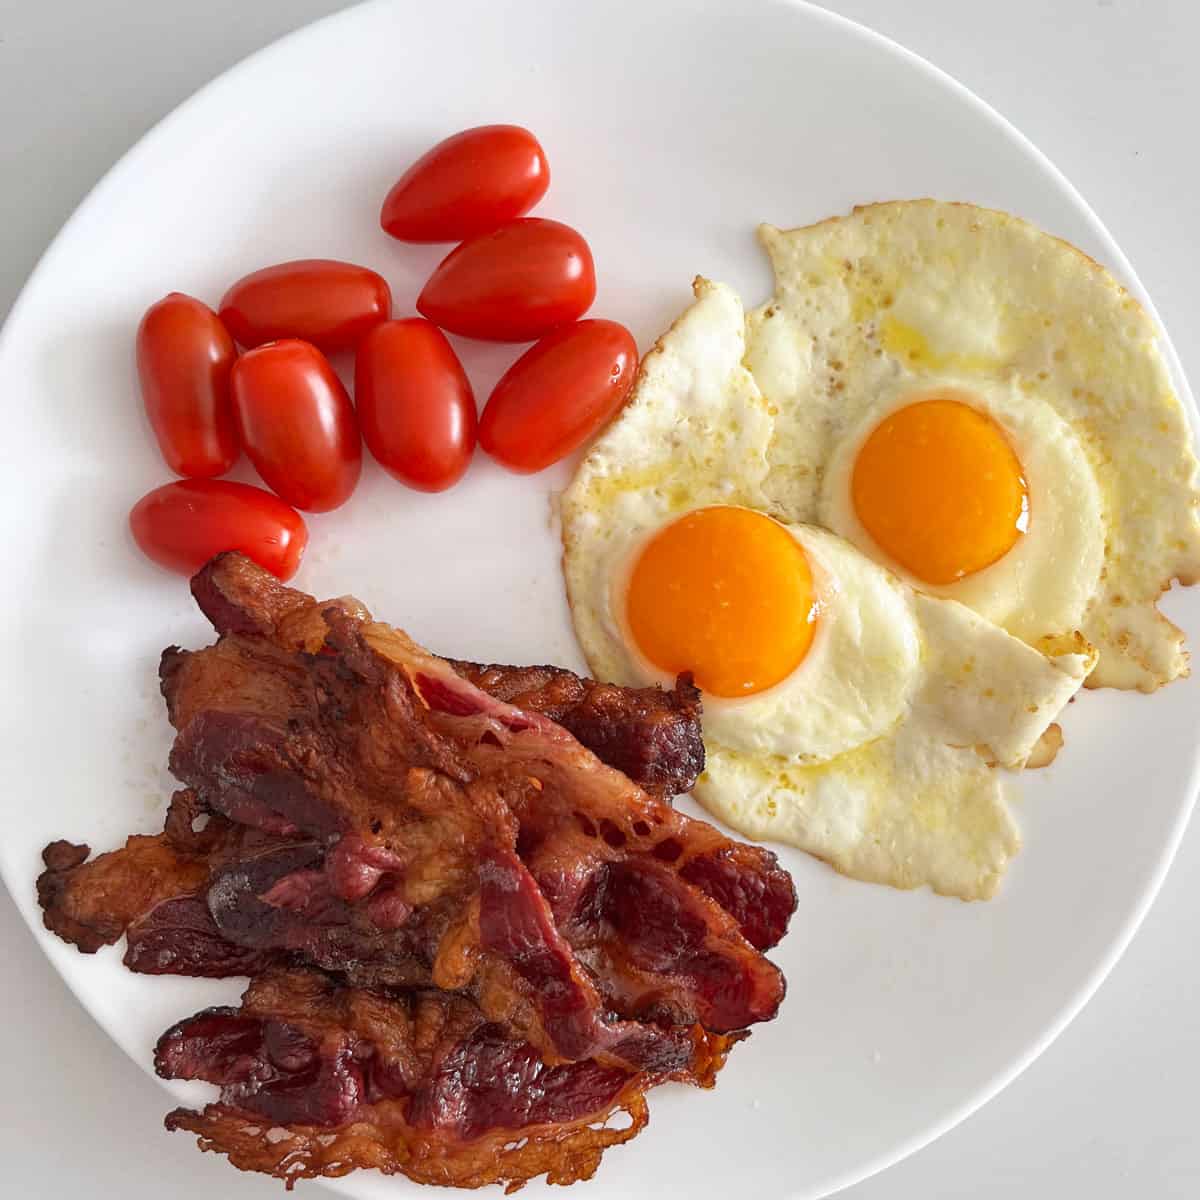 Beef bacon served with eggs and tomatoes.